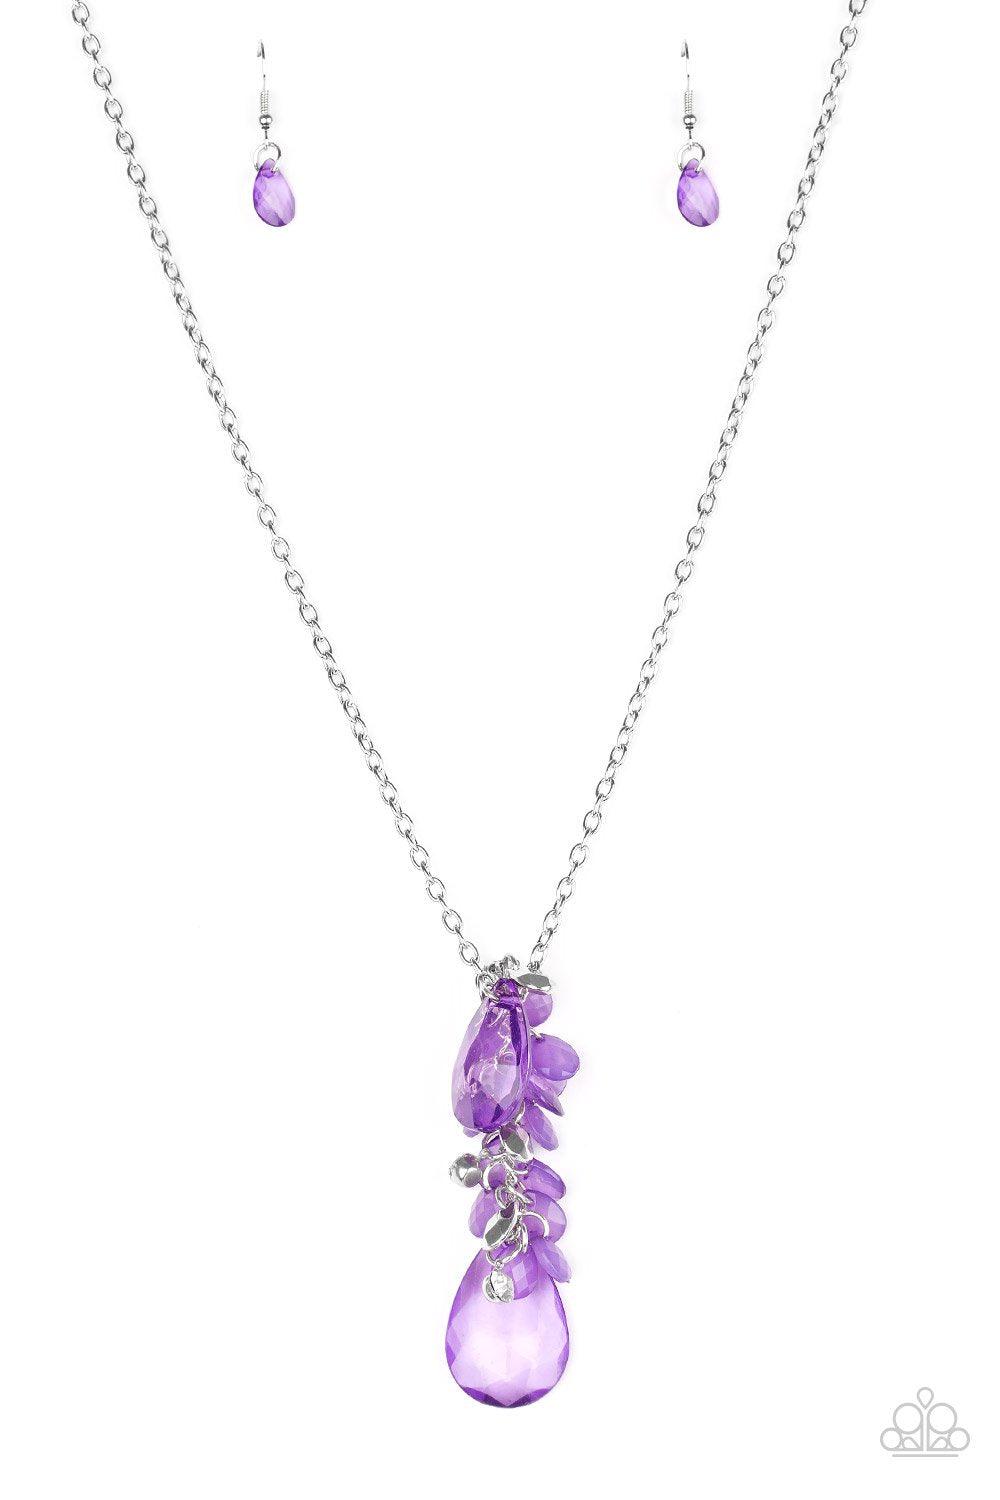 Summer Solo Silver and Purple Necklace - Paparazzi Accessories-CarasShop.com - $5 Jewelry by Cara Jewels